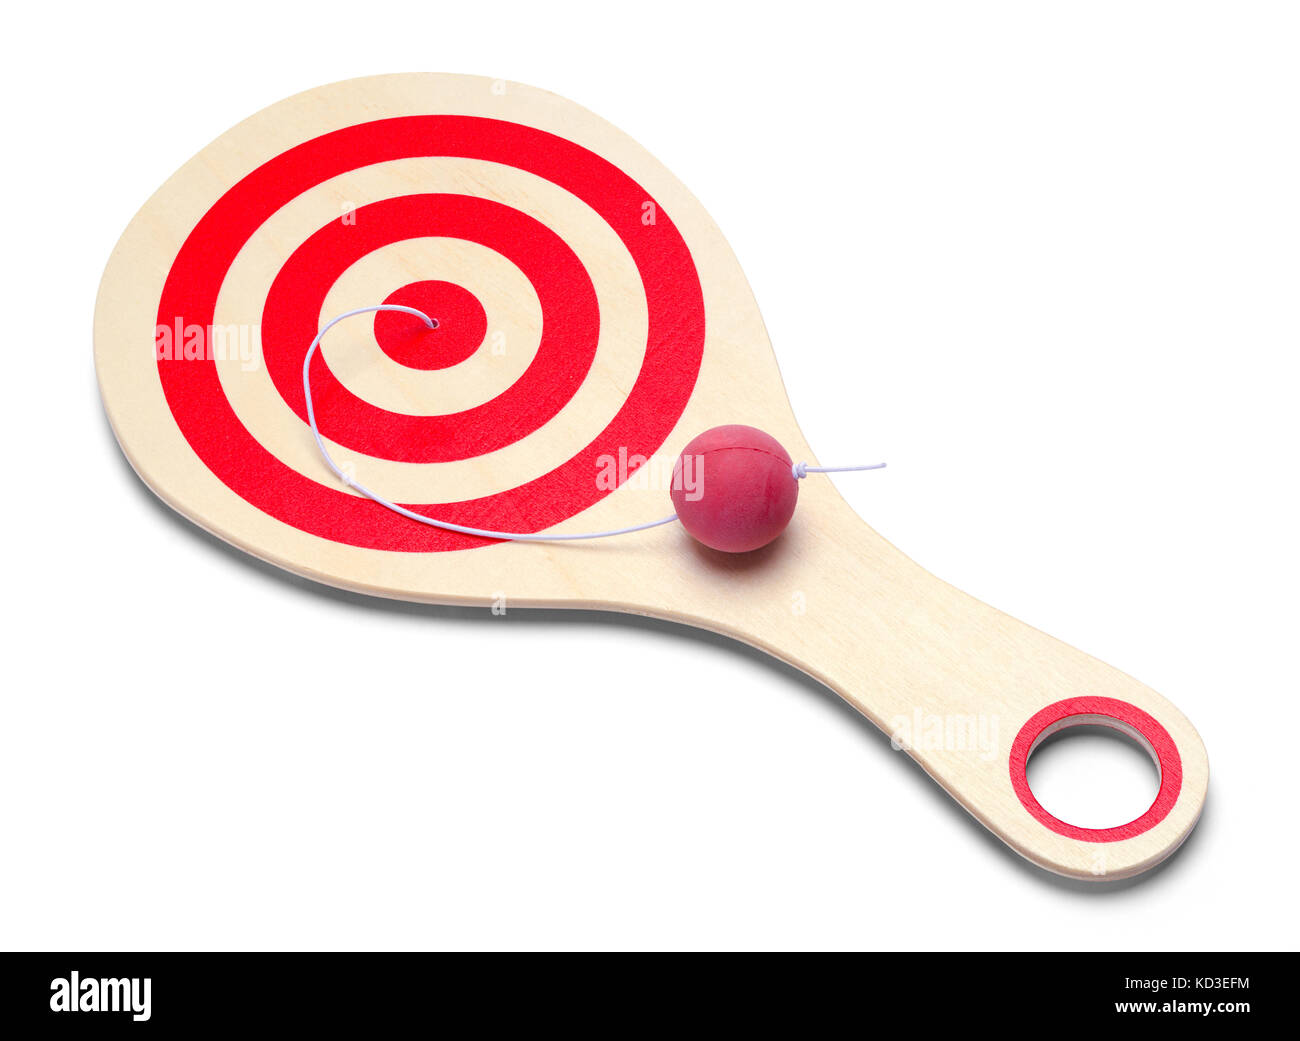 Wood Paddle Ball Toy Isolated on a White Background. Stock Photo